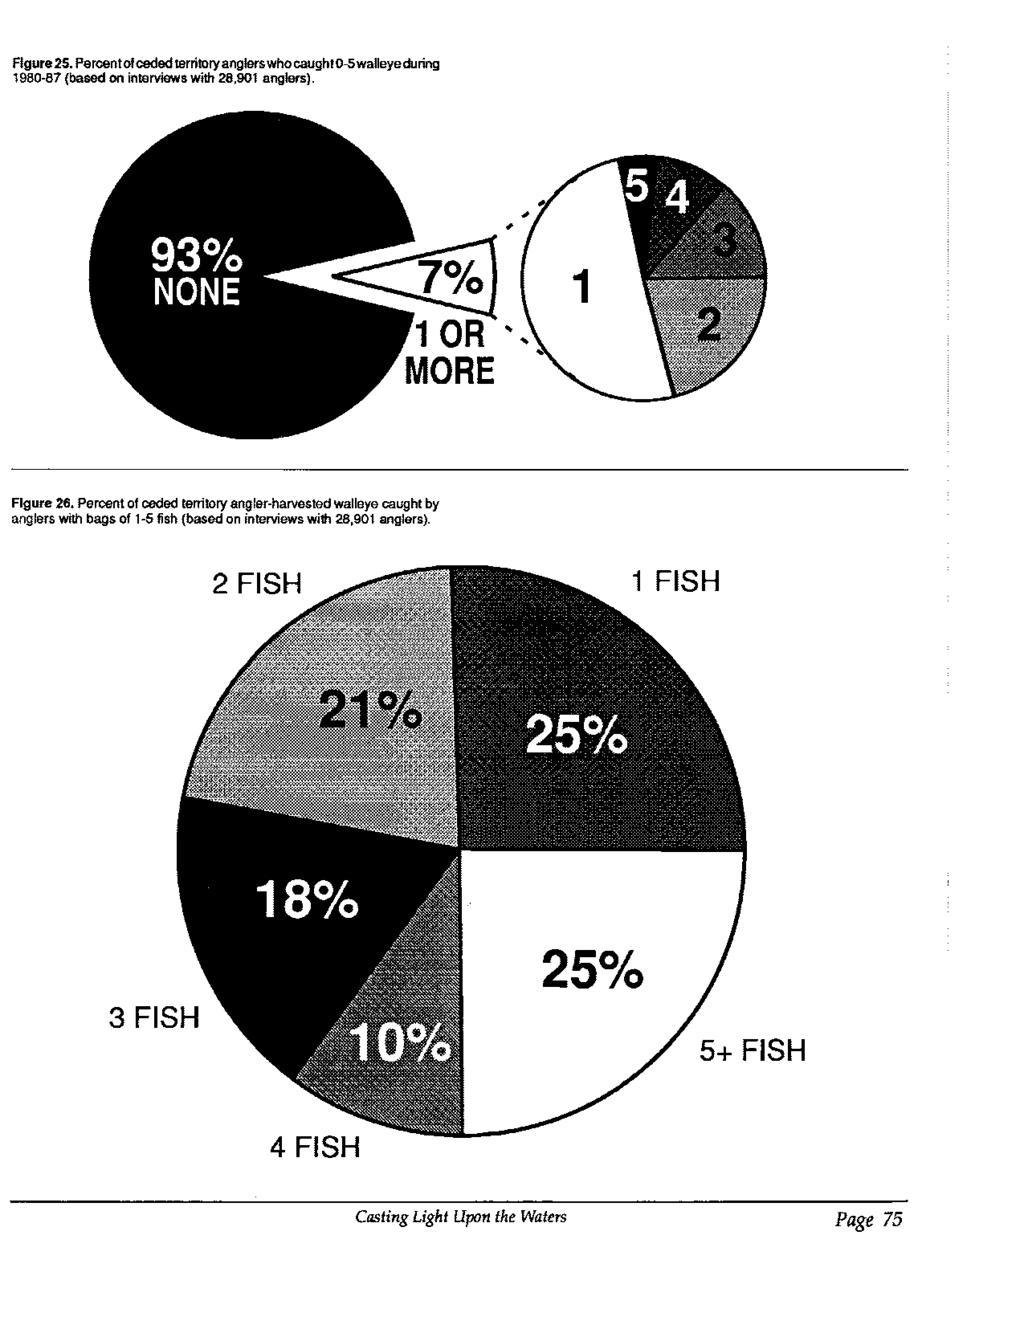 Figure 25. Percent of ceded territory anglers who caught0-5walleyeduring 19Bo-87 (based on interviews with 28,901 anglers). Figure 26.